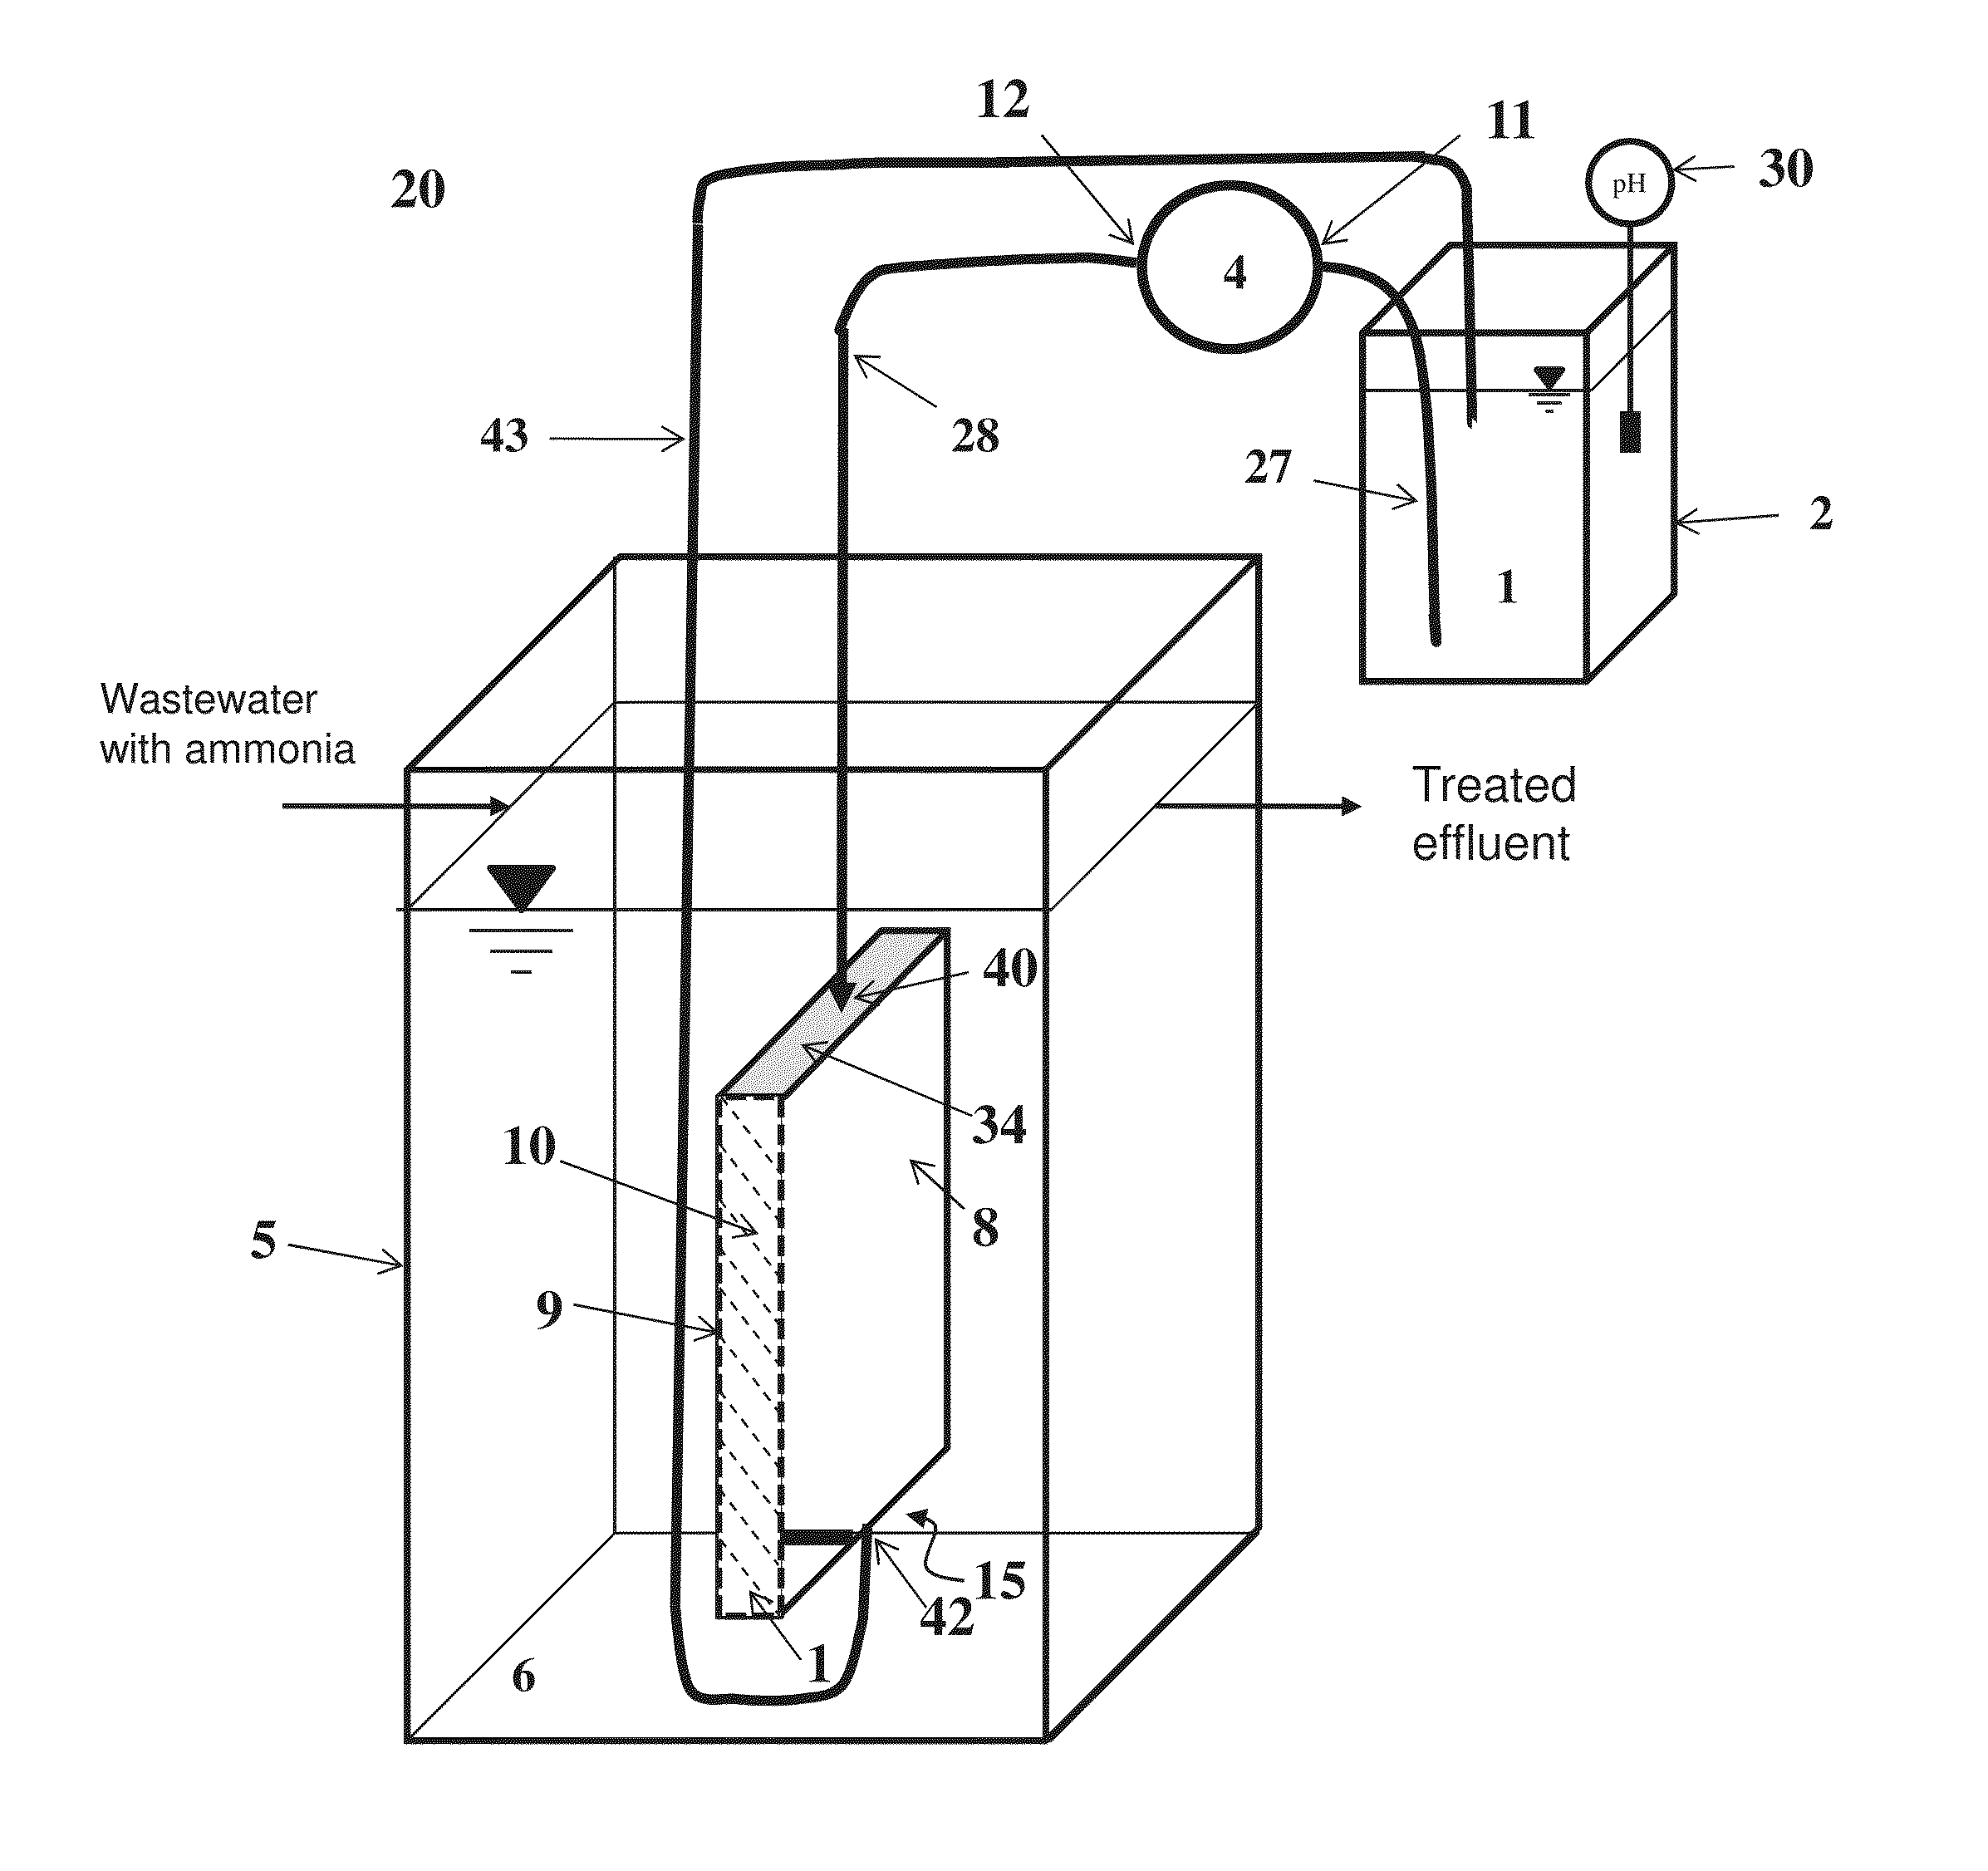 Systems and Methods for Reducing Ammonia Emissions from Liquid Effluents and for Recovering the Ammonia